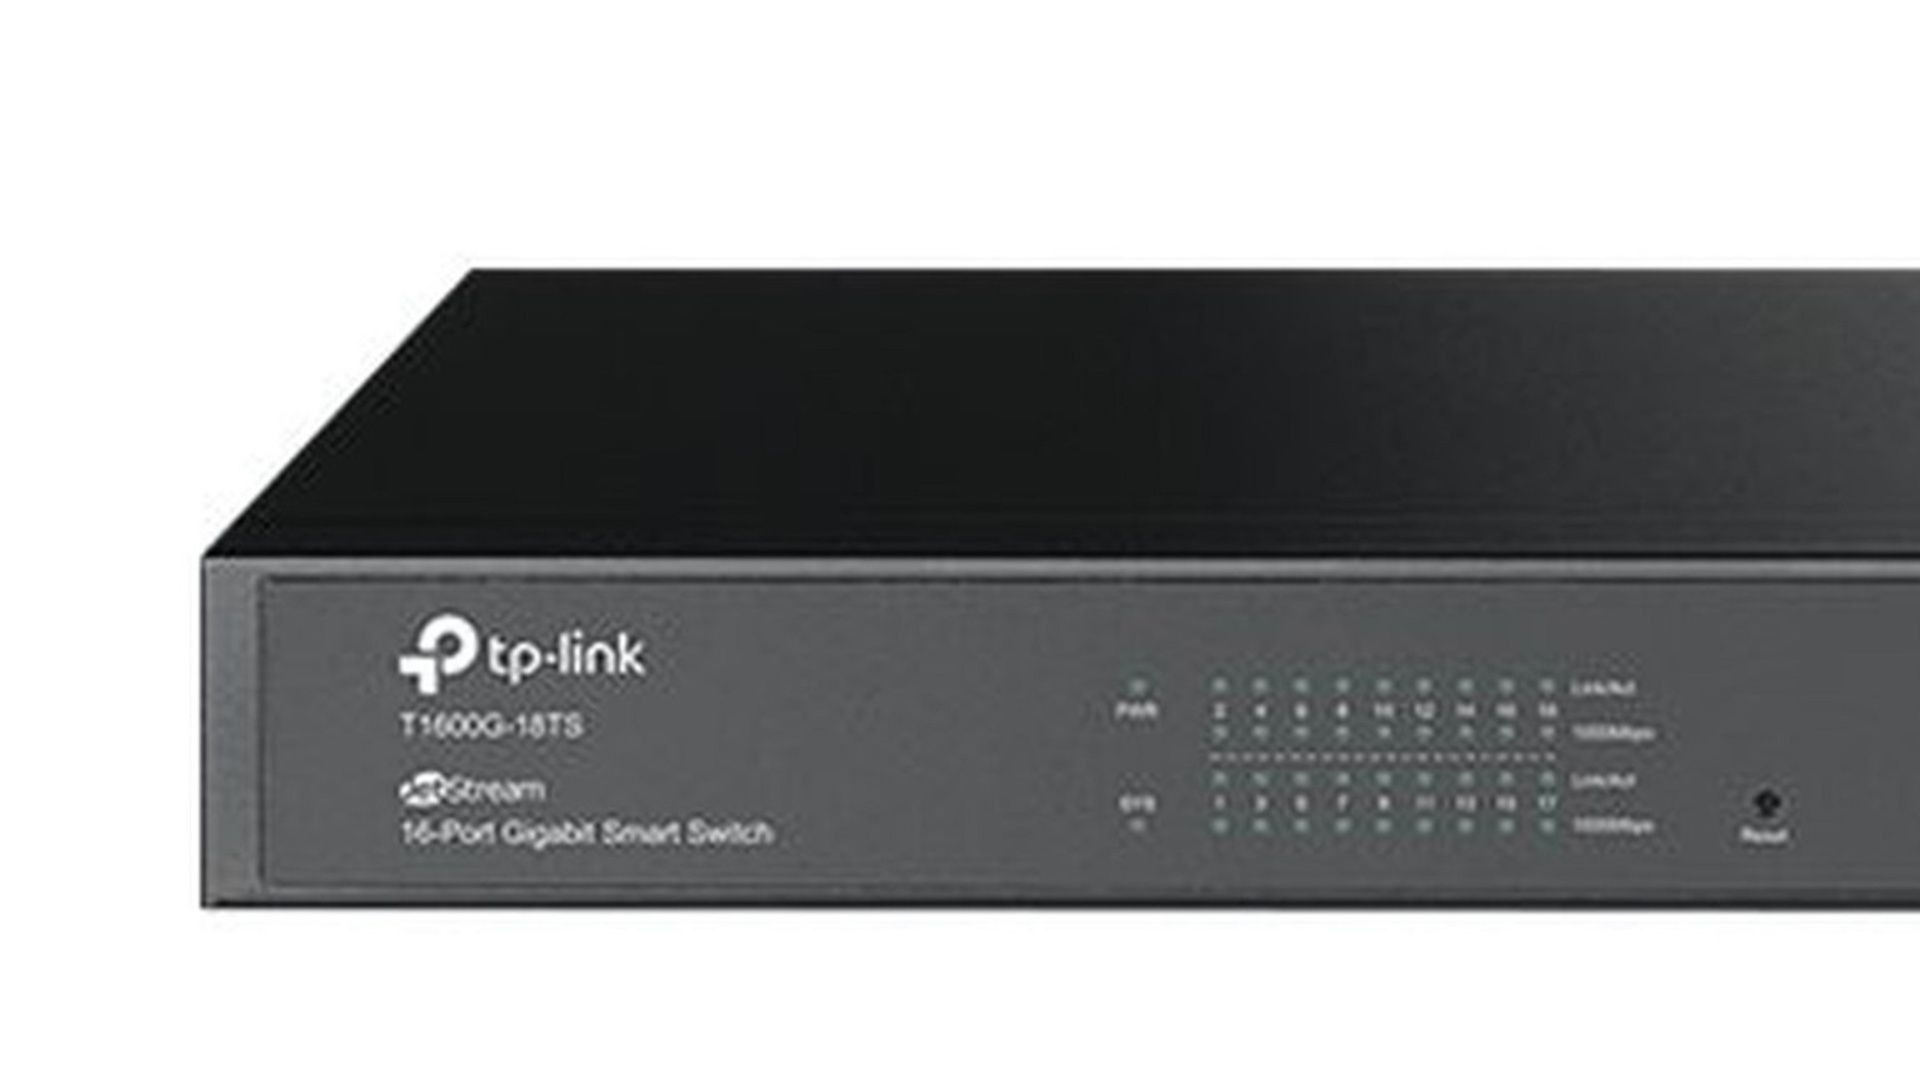 TP-Link smart switch